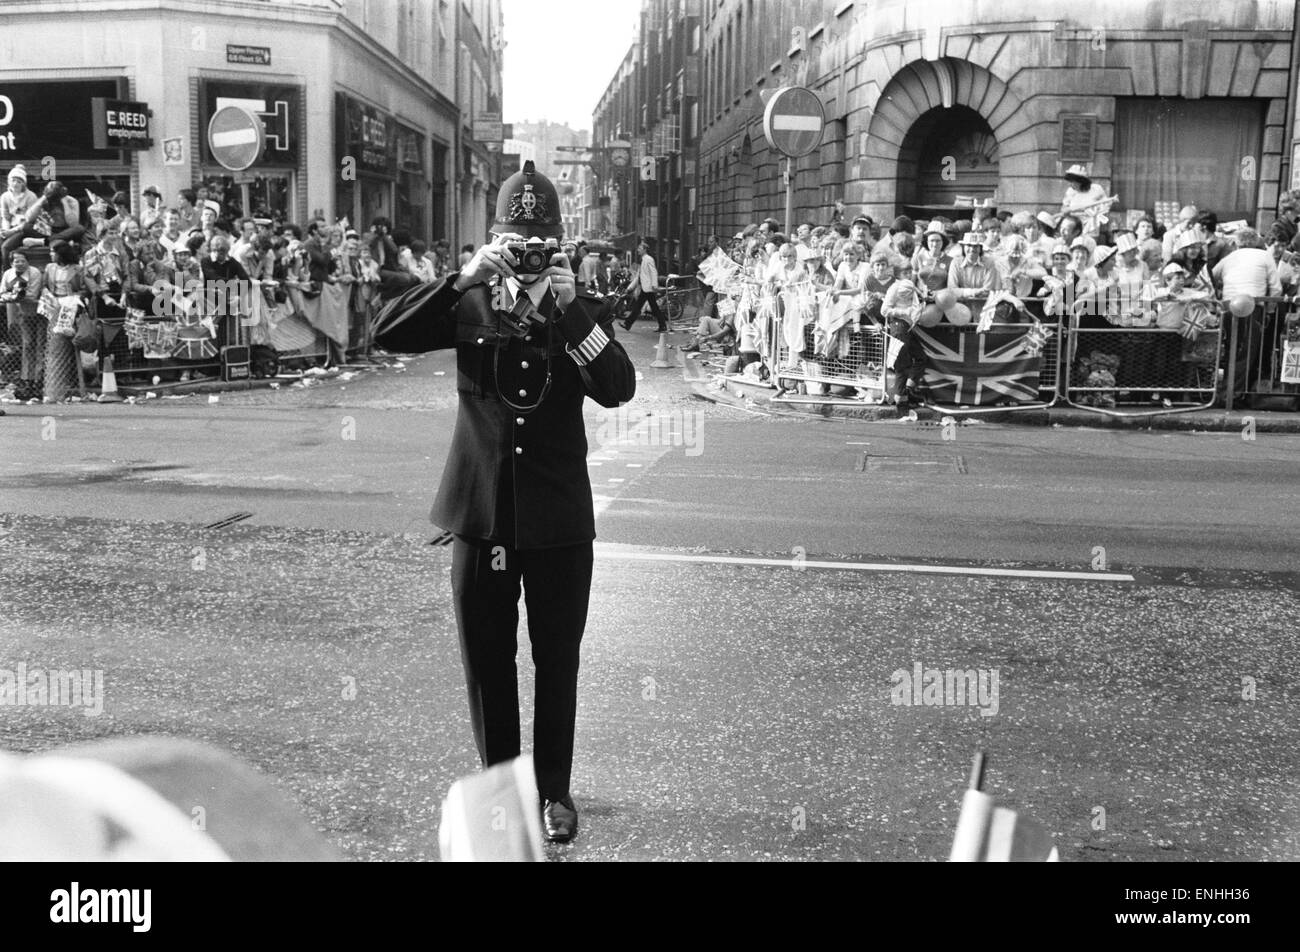 Wedding day of Prince Charles & Lady Diana Spencer, 29th July 1981. Picture: Helpful on duty Policeman takes a picture of the crowd lining the procession route in London. Stock Photo